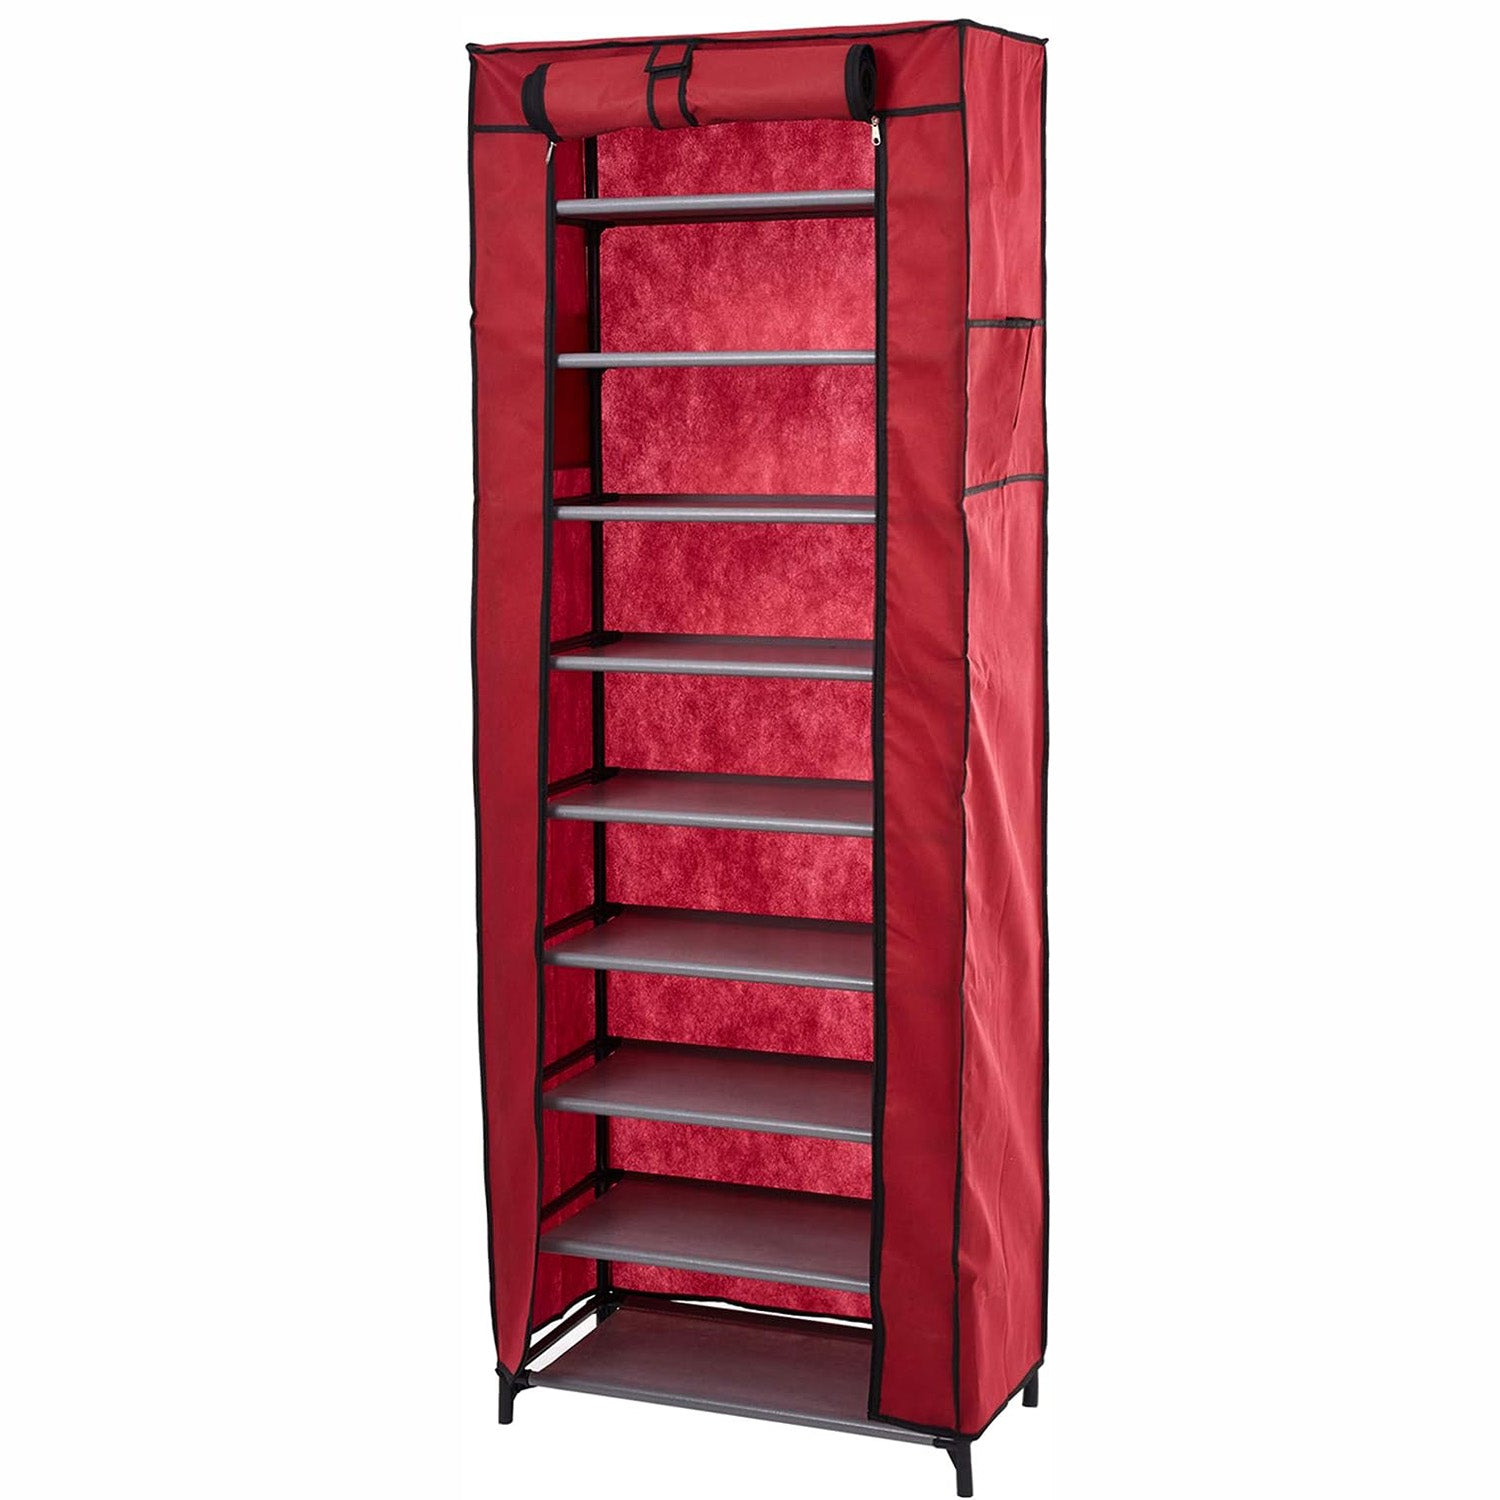 LUCKYERMORE 10 Tiers Shoe Rack with Dustproof Cover Shoes Storage Cabinet Boot Organizer, Red